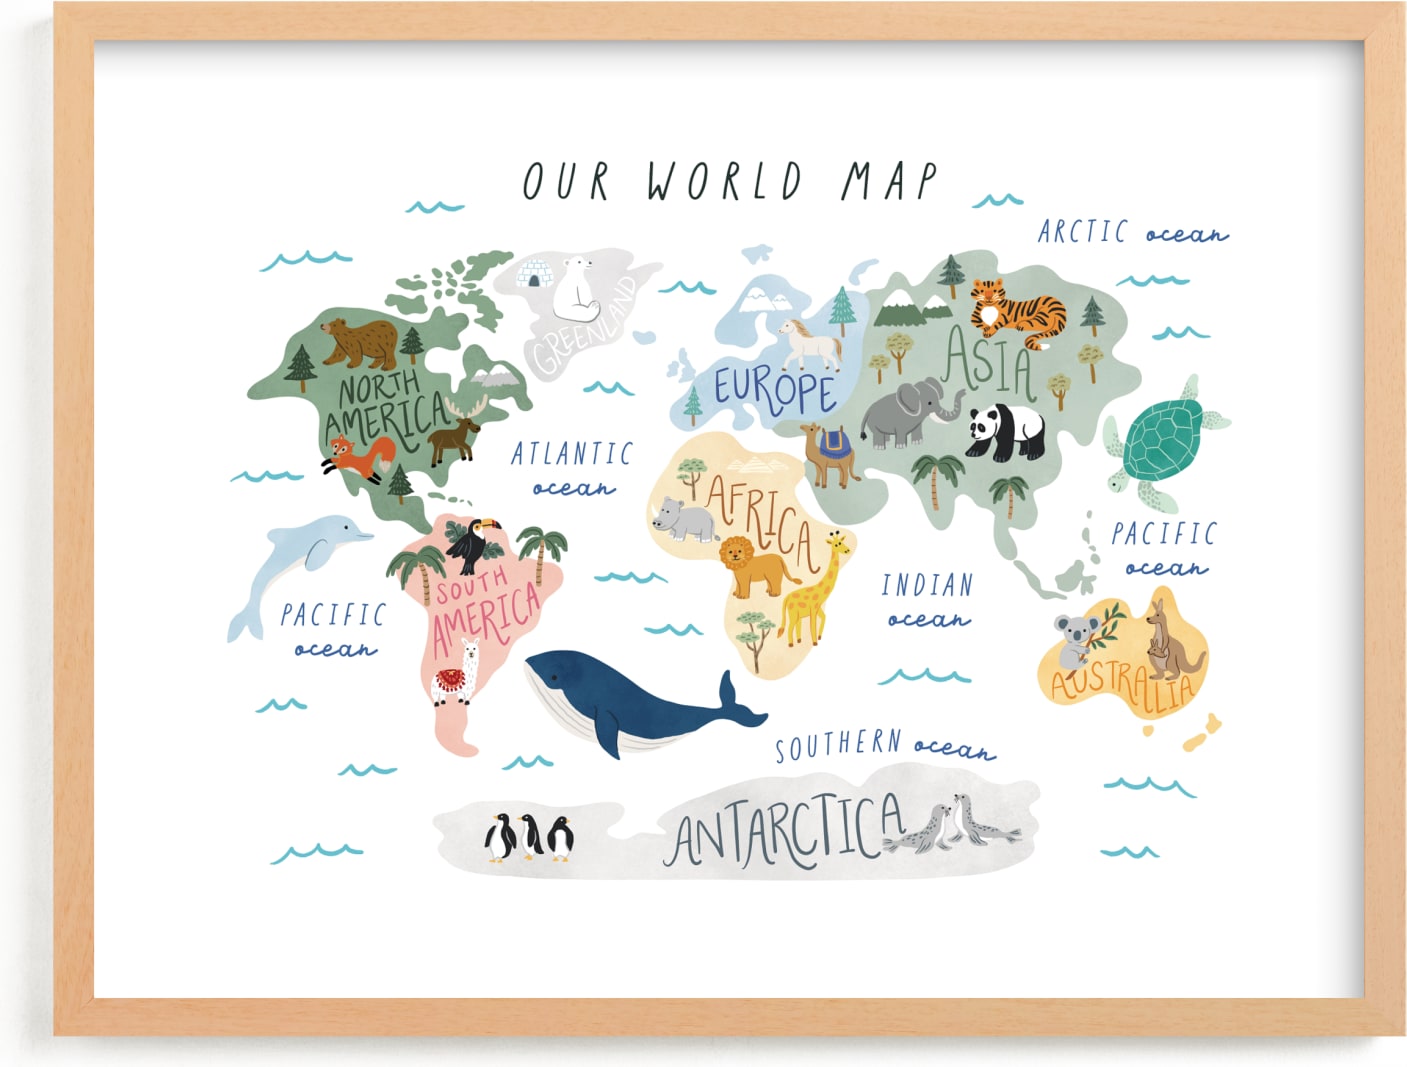 This is a blue, yellow, green kids wall art by Elly called Our World Map.